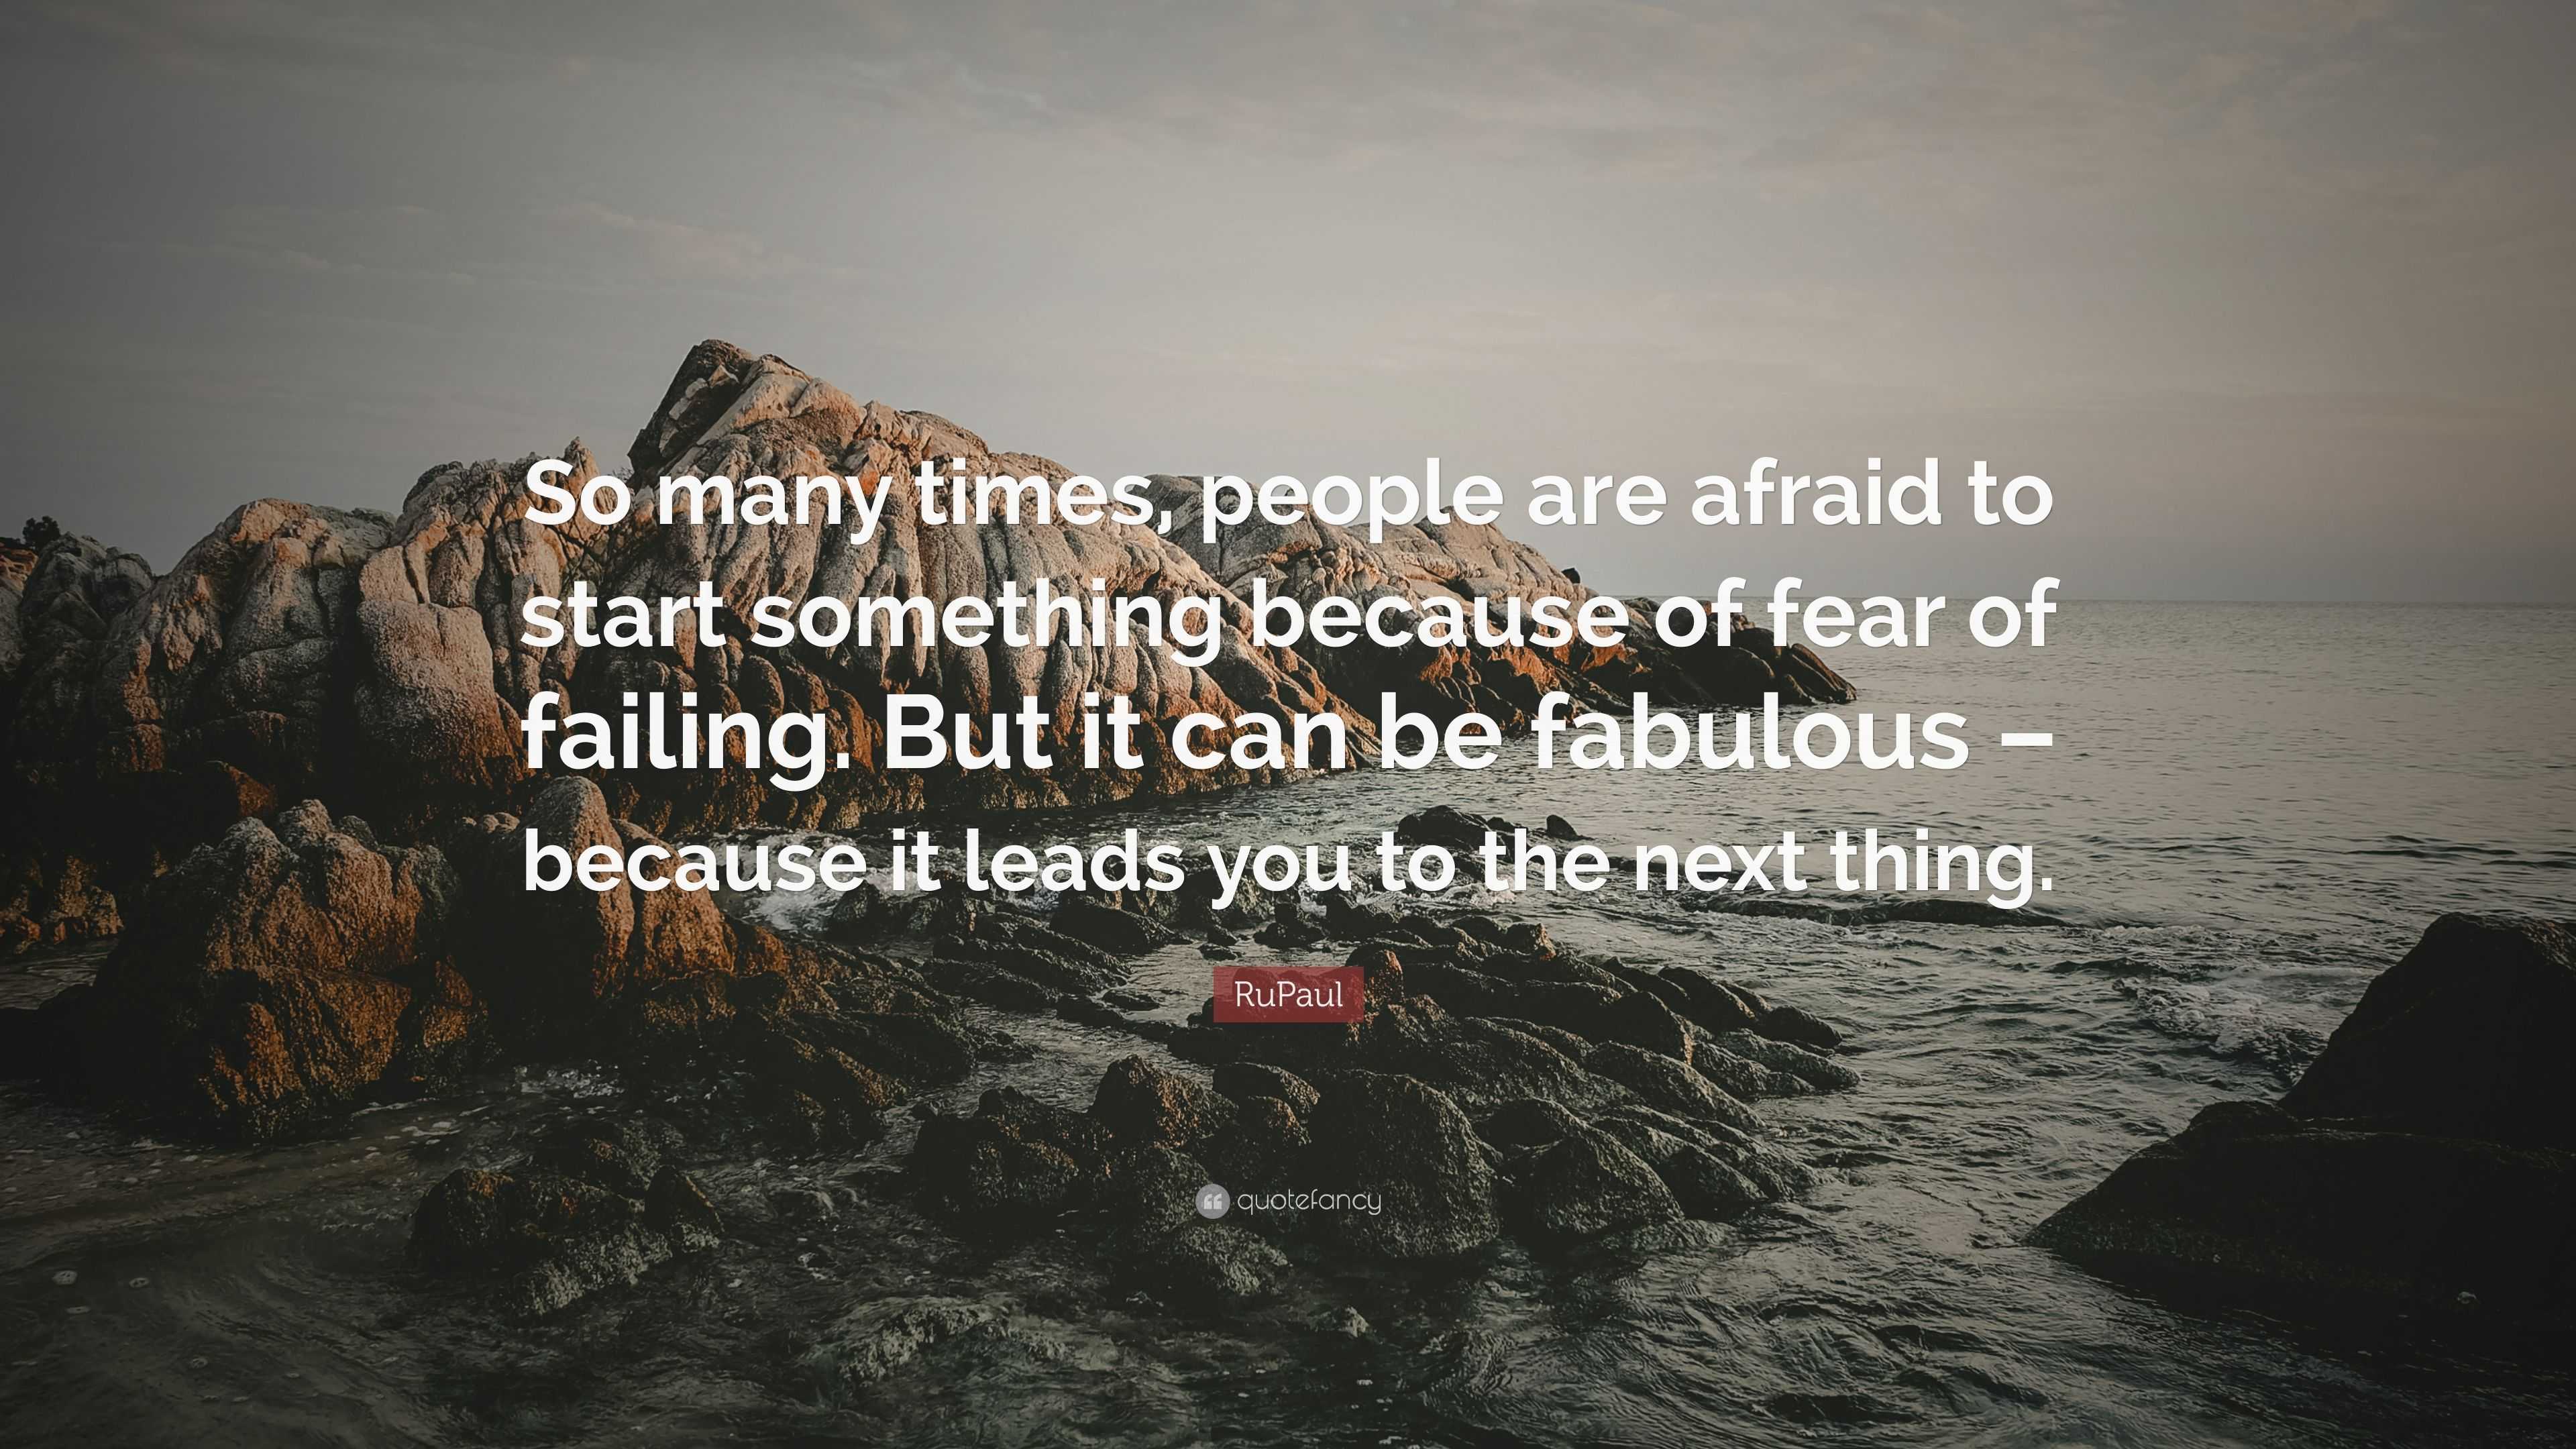 RuPaul Quote: “So many times, people are afraid to start something